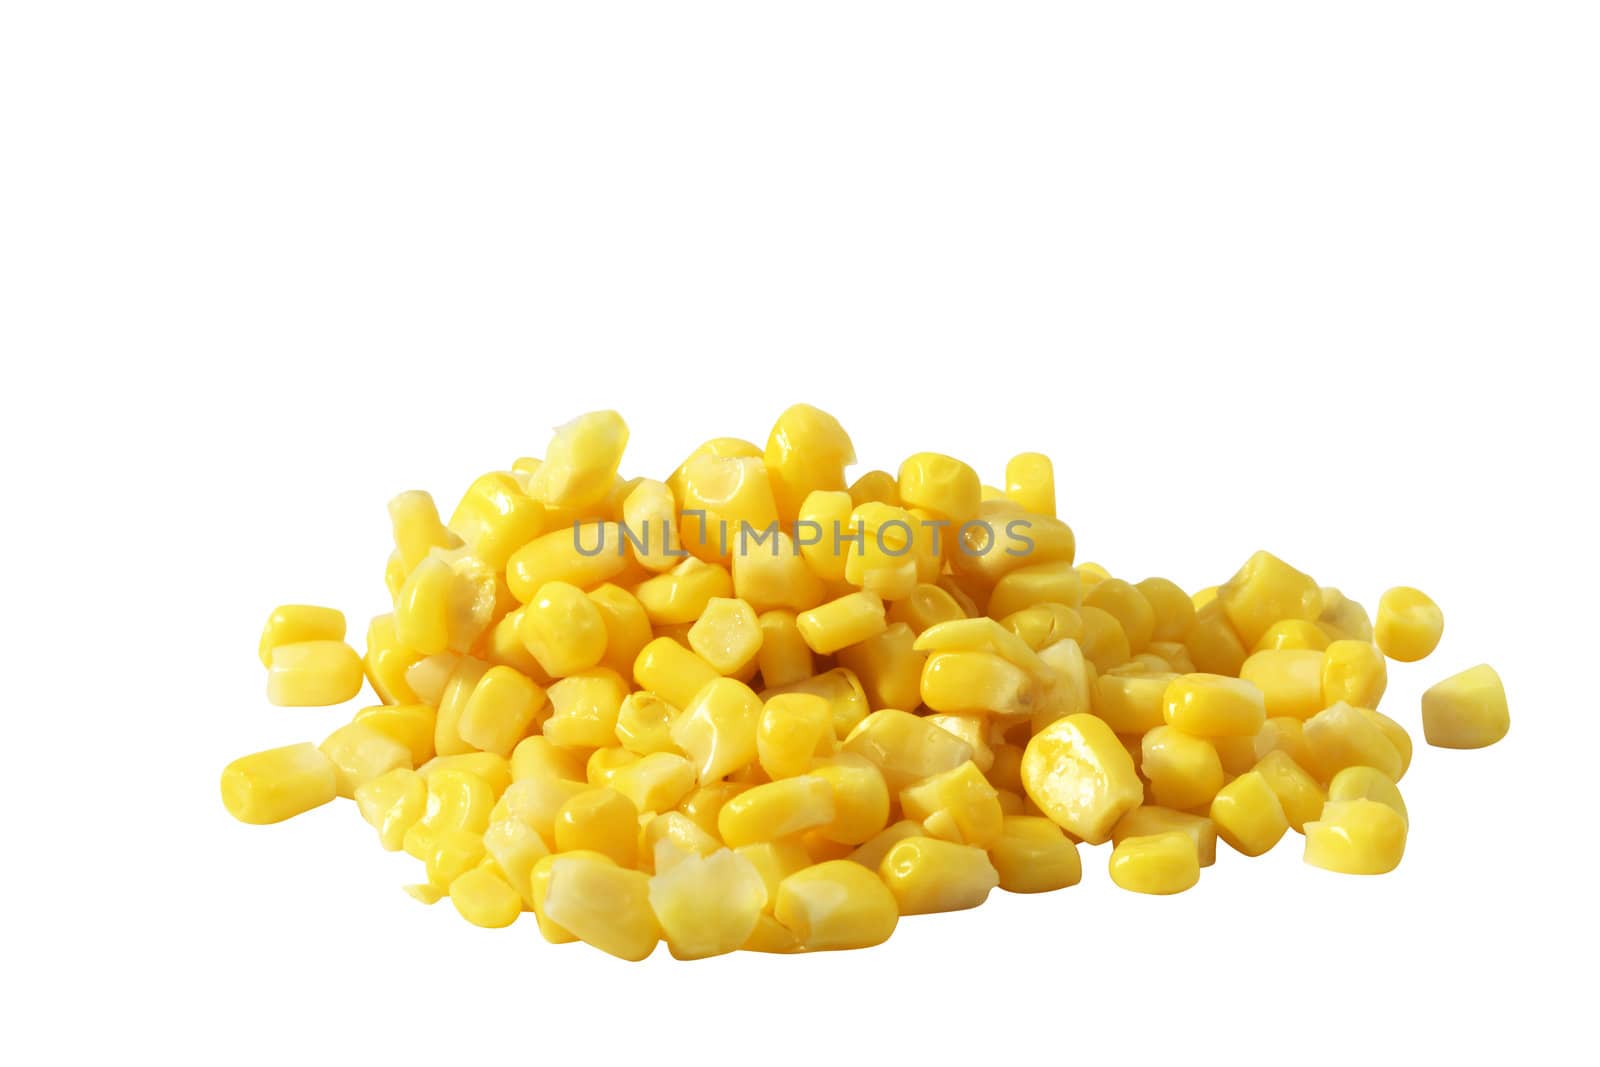 Corn beans lying on white background. Isolated with clipping path